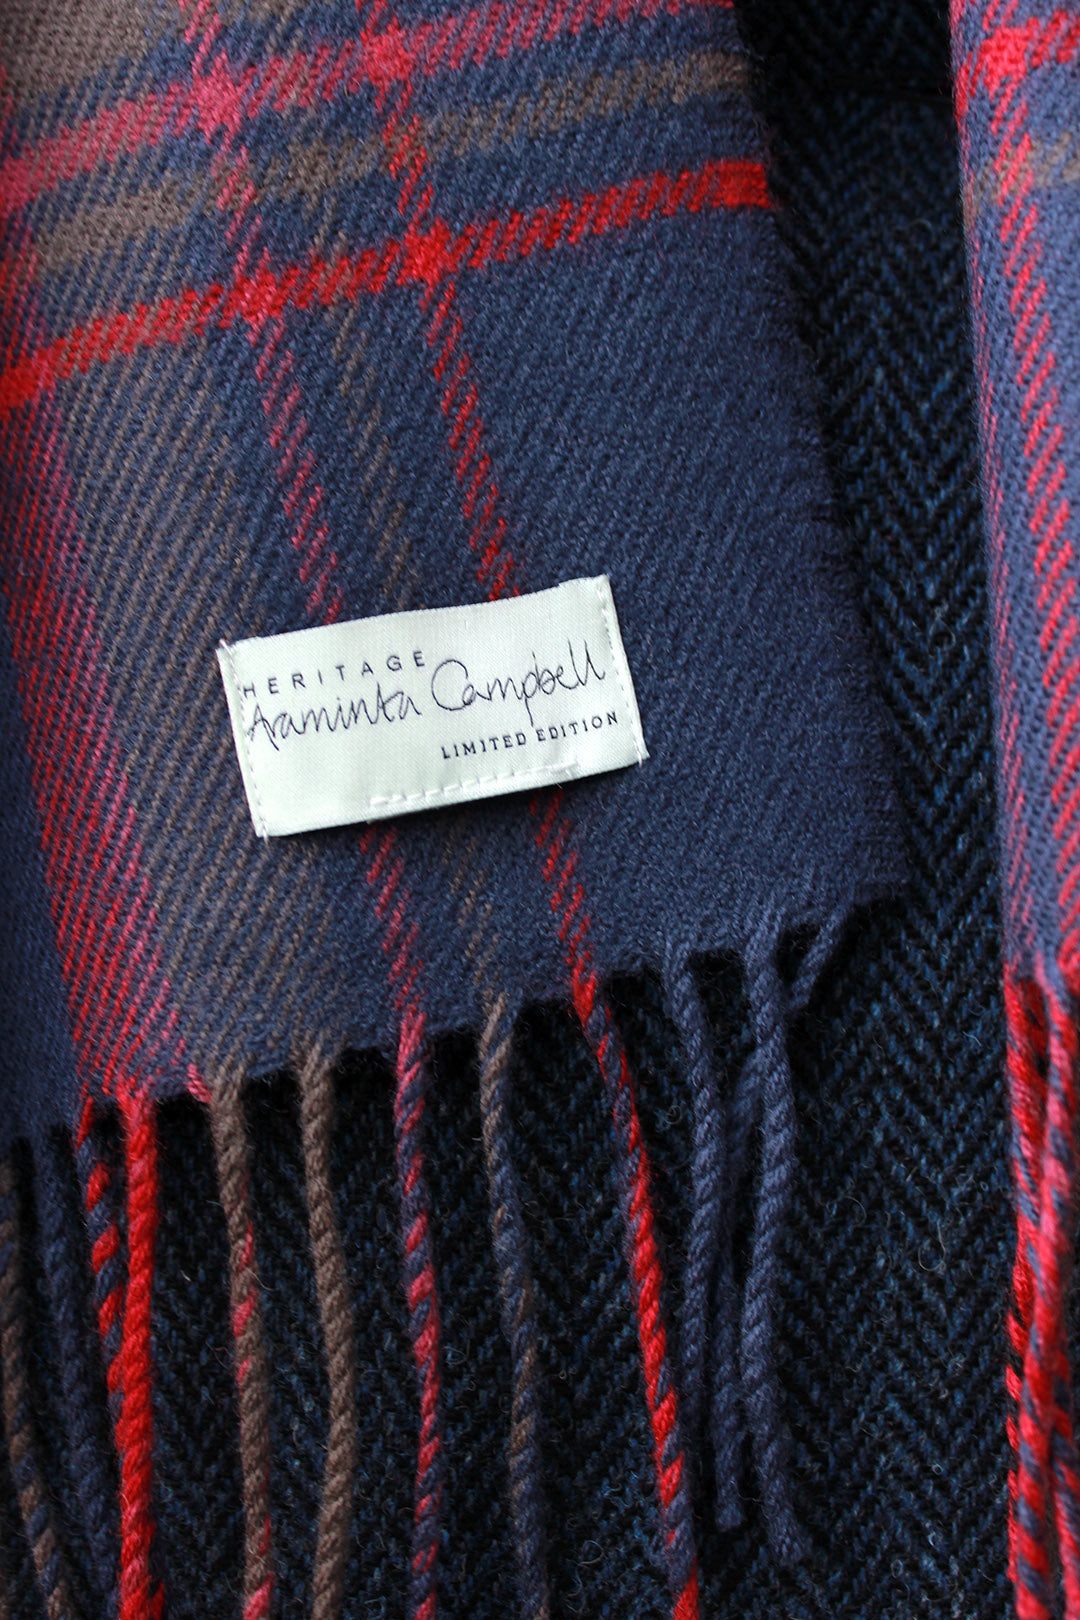 Araminta Campebell Highlands at Dusk woven lambswool scarf with tassels. Woven with muted dusky blue, grey and sunset red. Scottish Textiles Showcase.